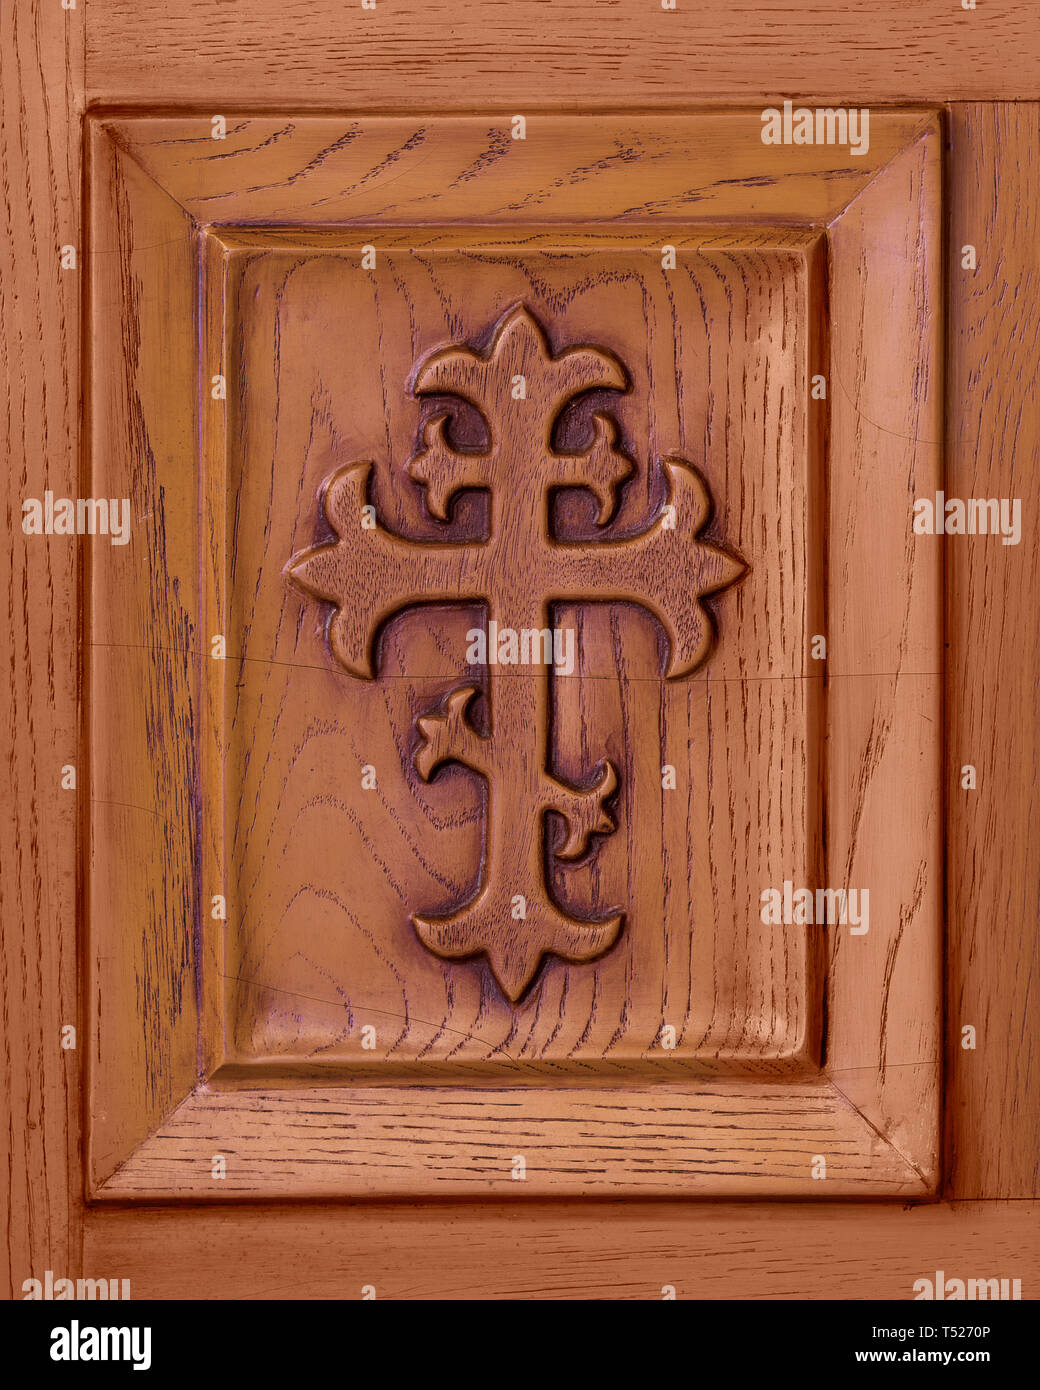 Christian cross etched in wooden panel Stock Photo